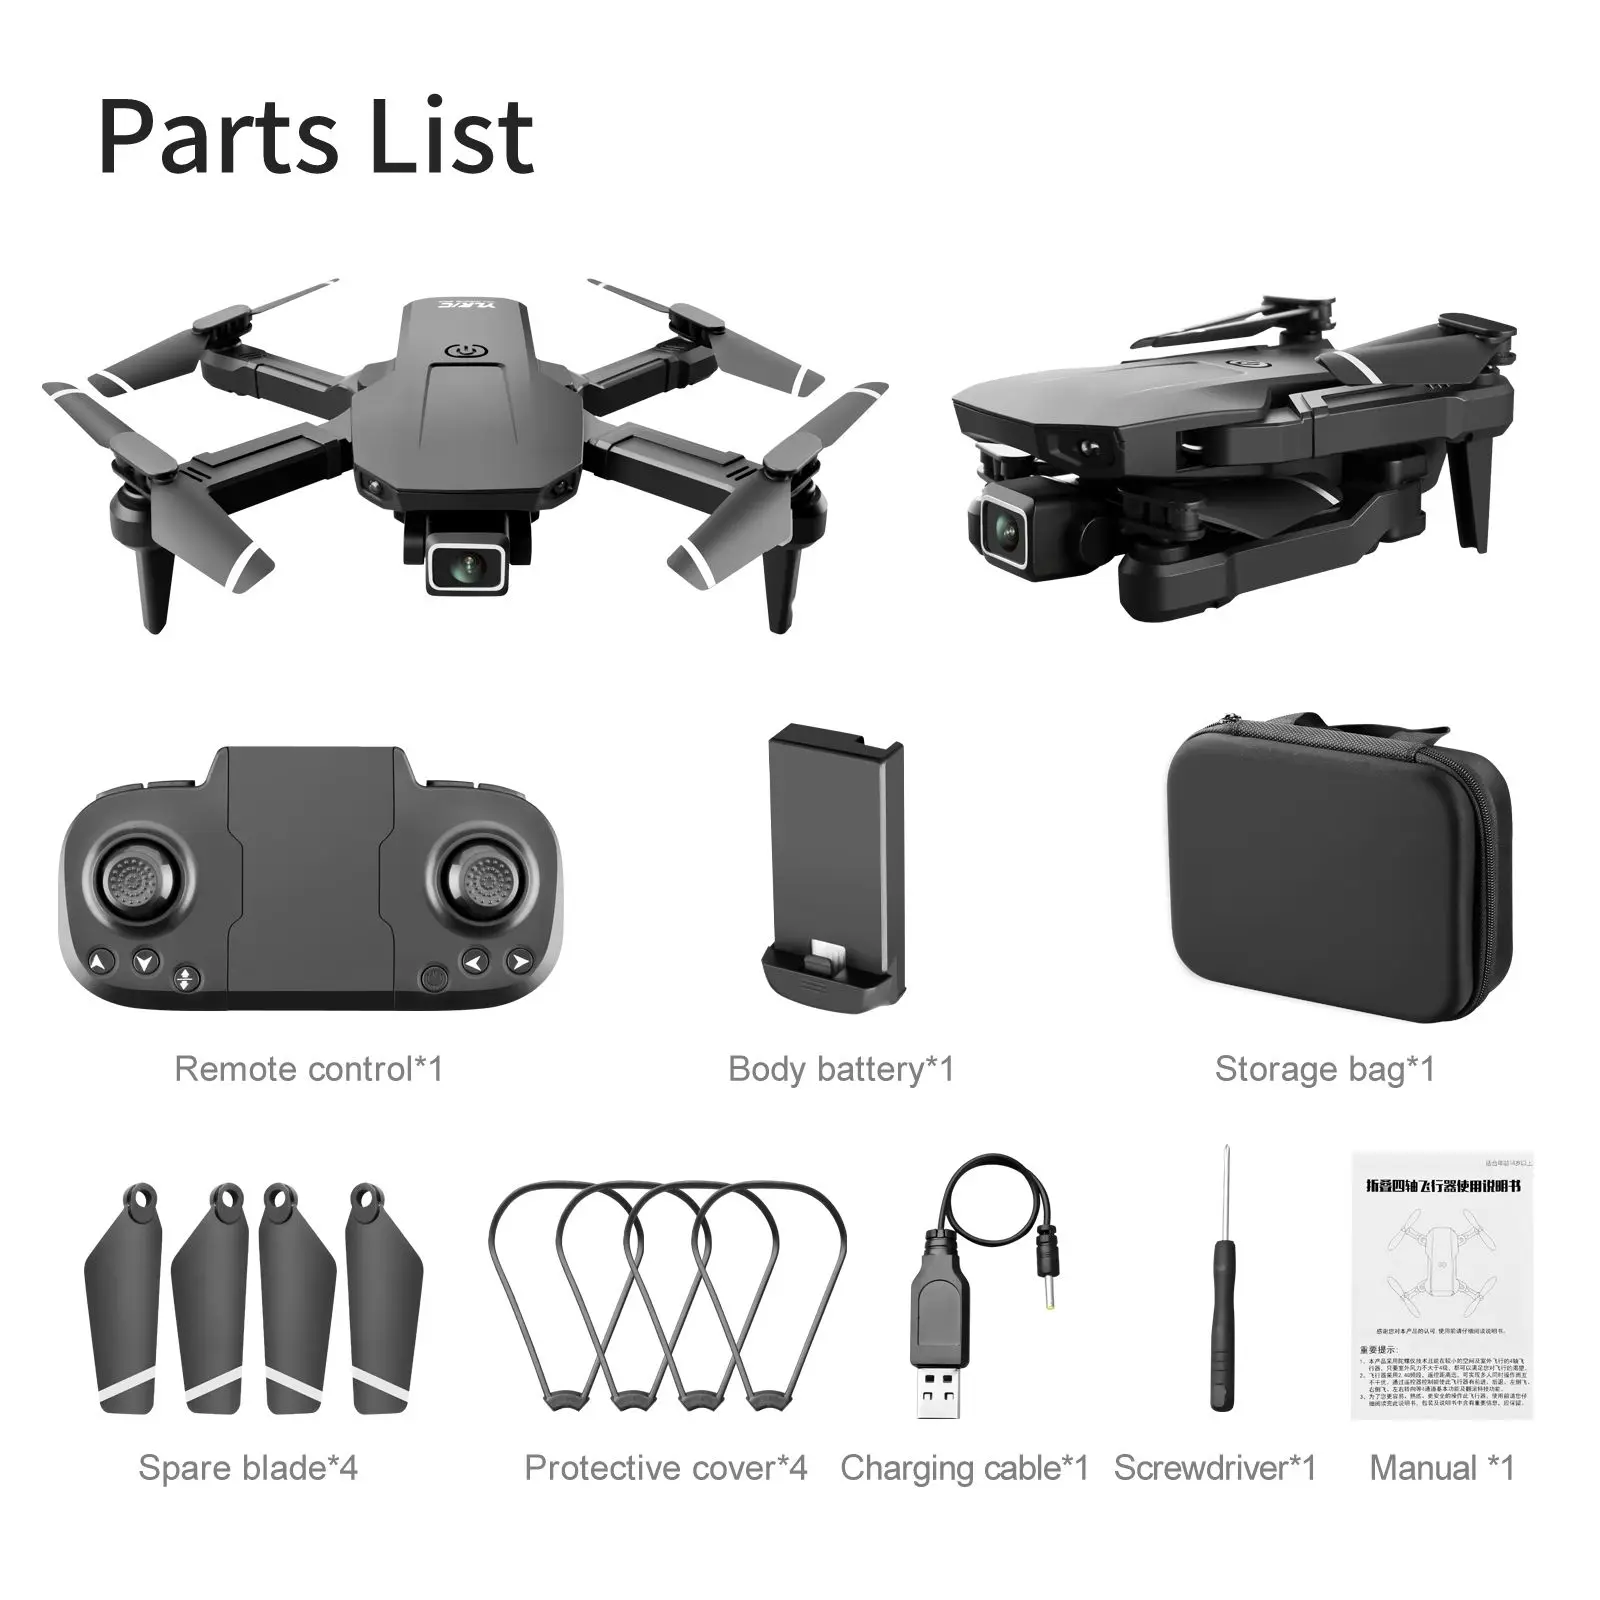 Mini Foldable Drone S68 Pro Mini Drone 4K HD Dual Camera Wide Angle WiFi FPV Drones Quadcopter Height Keep Dron Helicopter Toy 